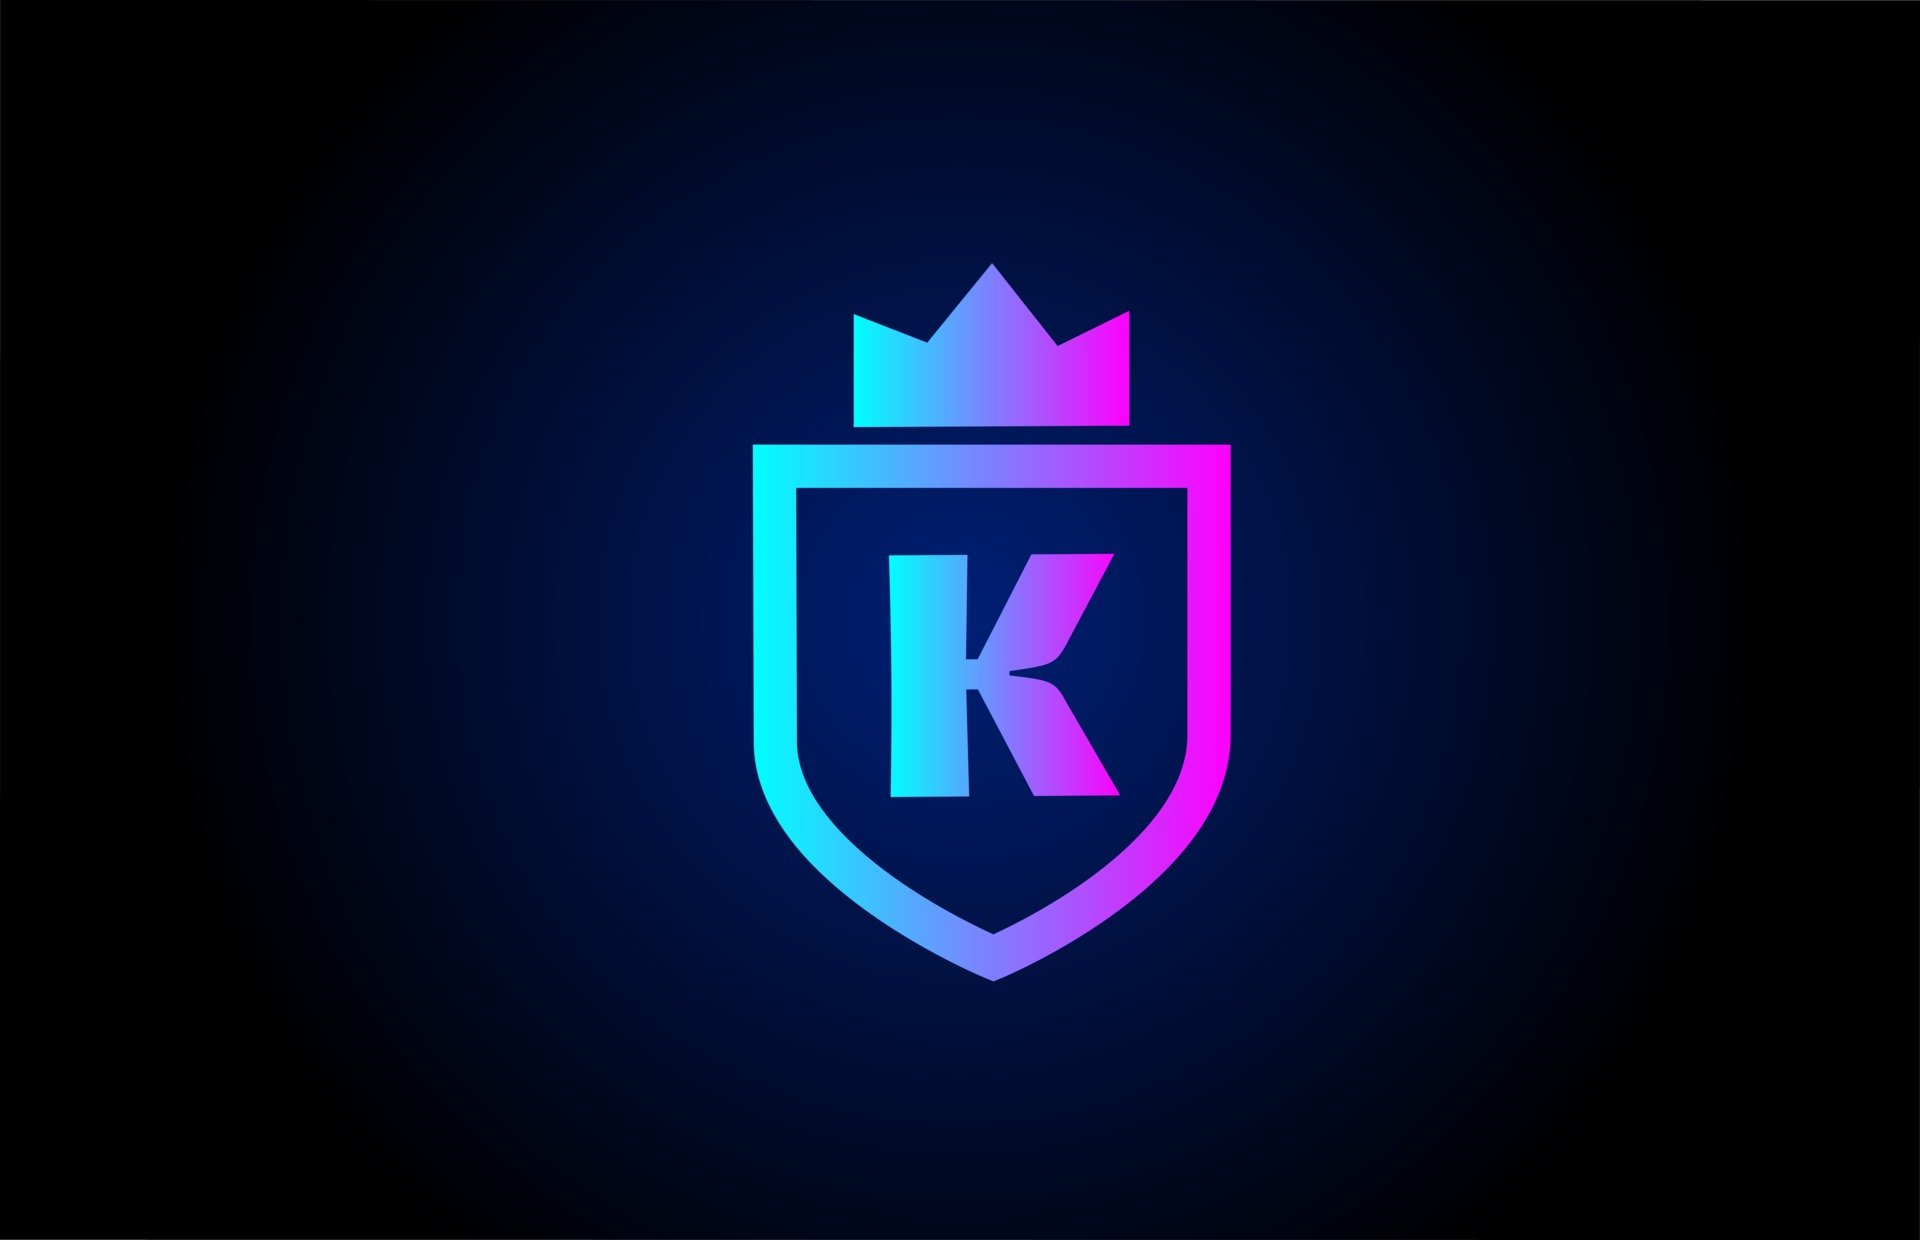 royal-k-alphabet-letter-icon-logo-for-business-company-design-with-king-crown-and-shield-in-gr...jpg